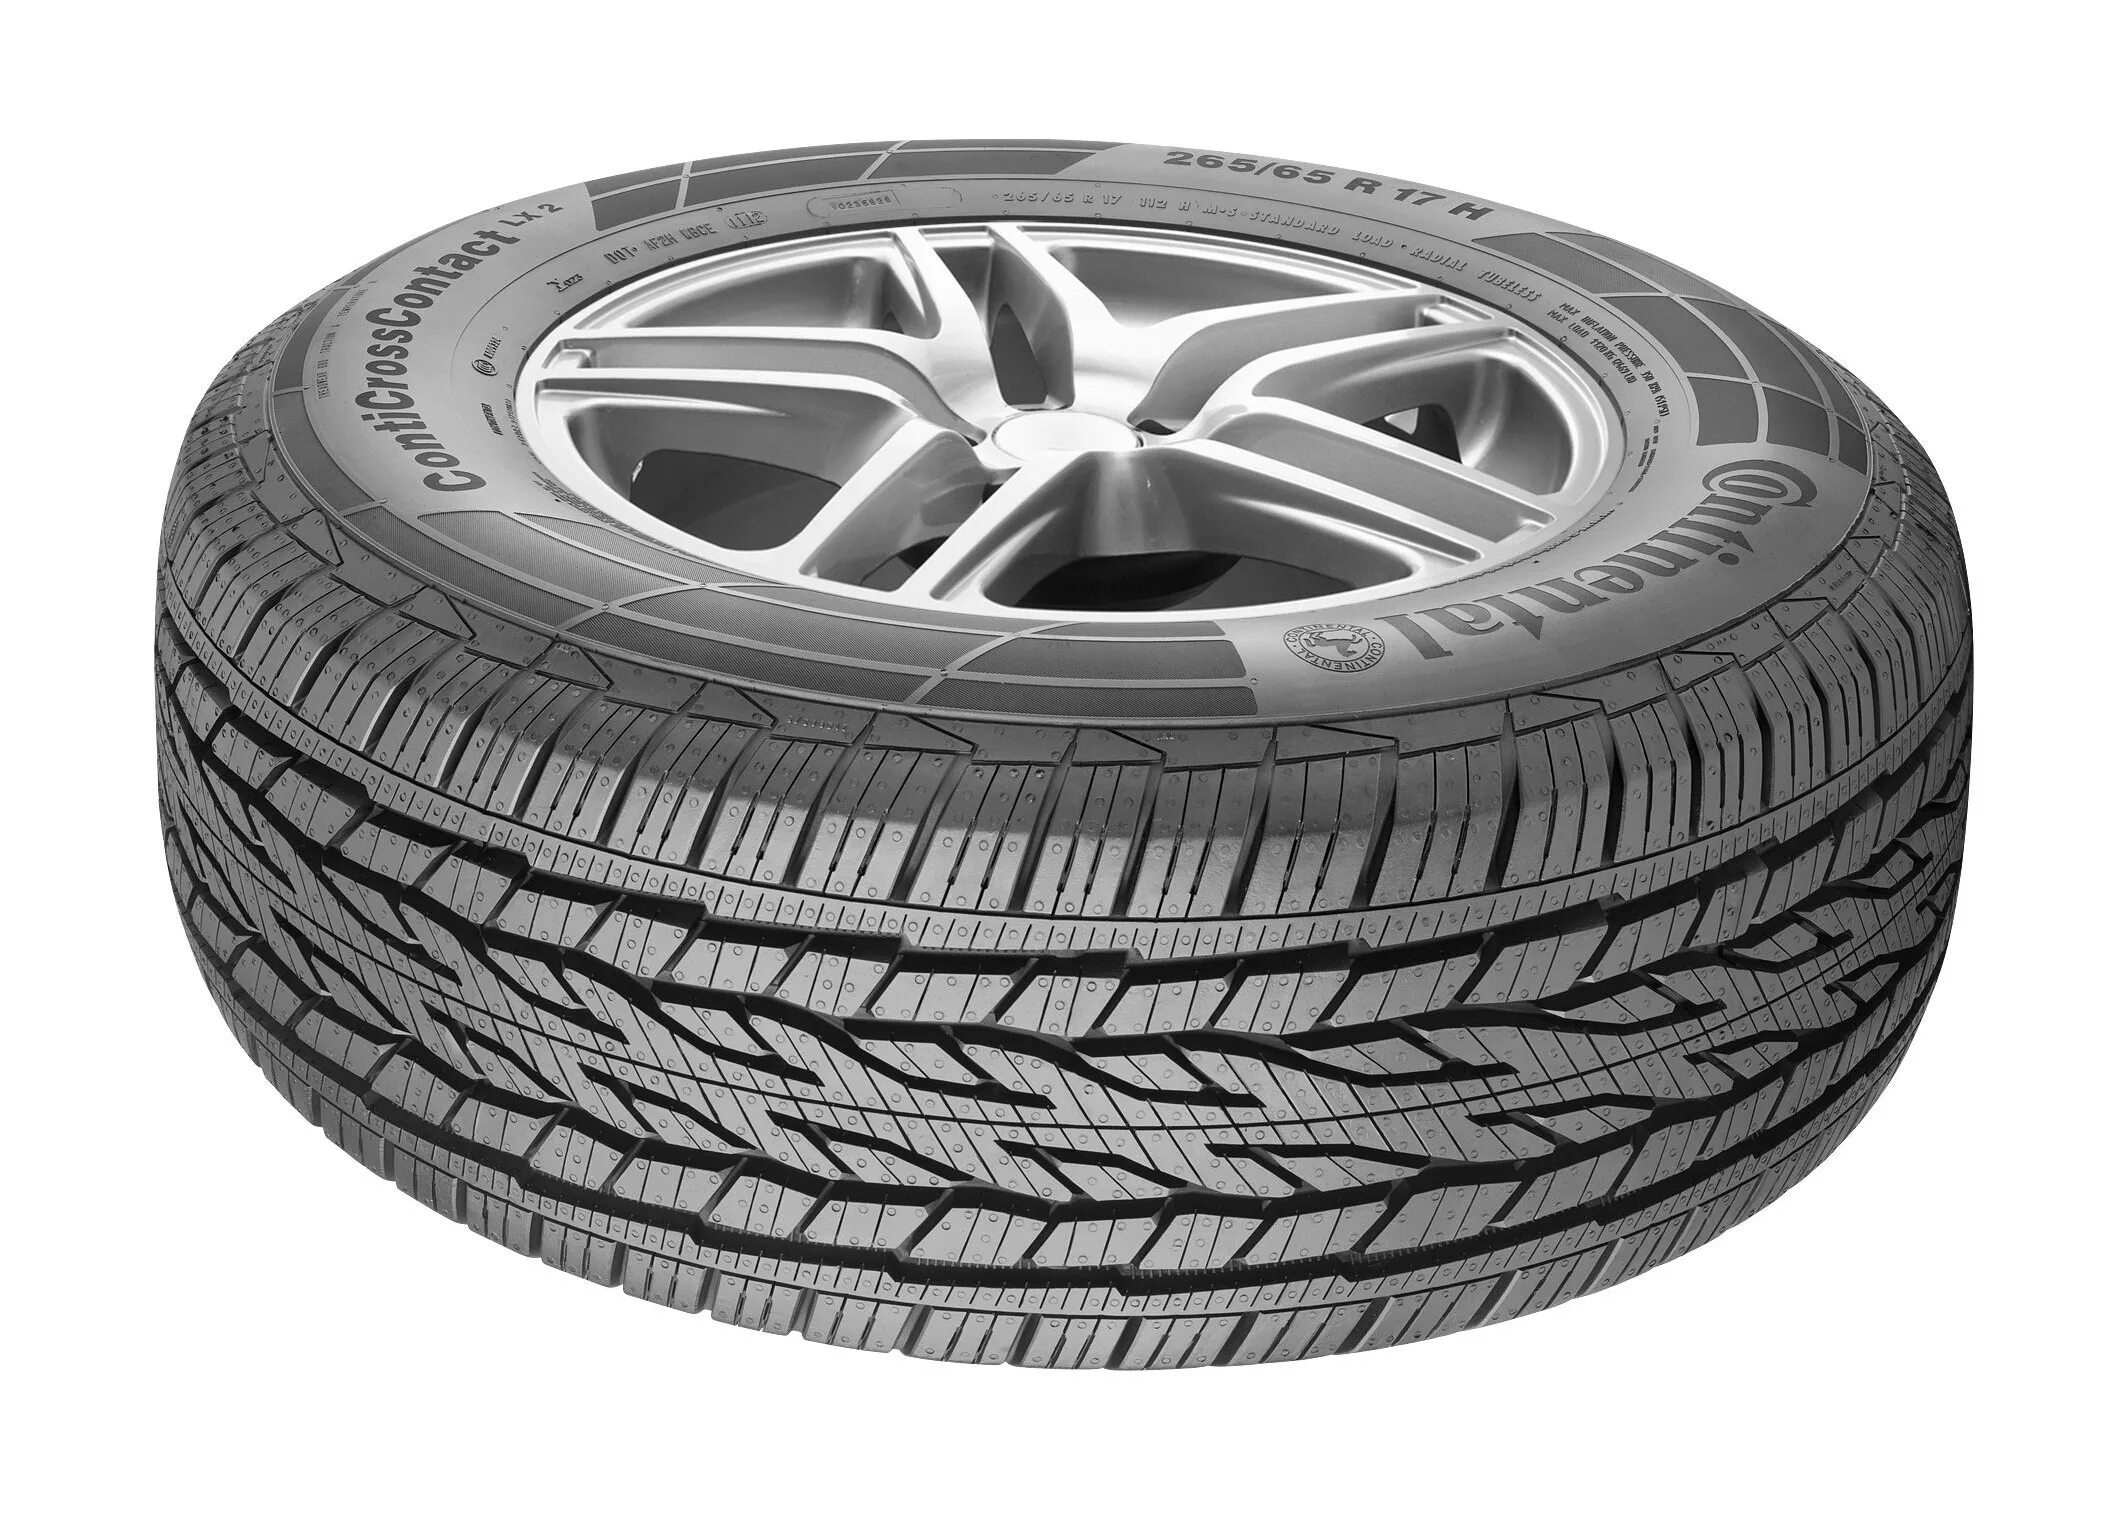 Continental conticrosscontact lx2 215 60 r17 96h. Шины Continental CONTICROSSCONTACT lx2. Continental CONTICROSSCONTACT lx2. Continental CROSSCONTACT lx2 215/60 r17.